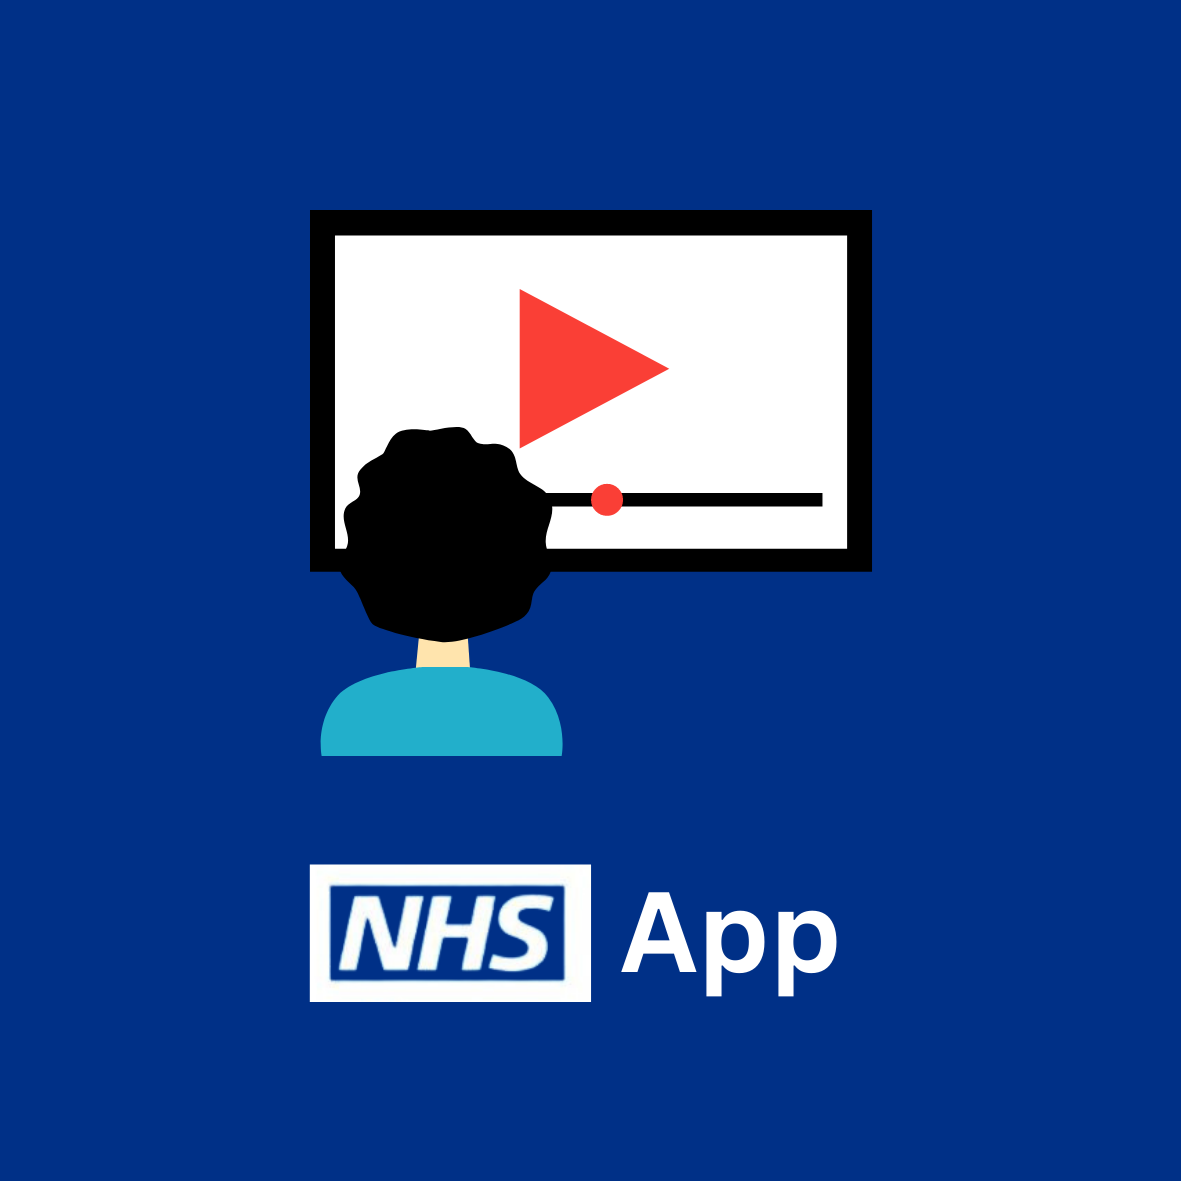 Person watching a You Tube Video about the NHS App